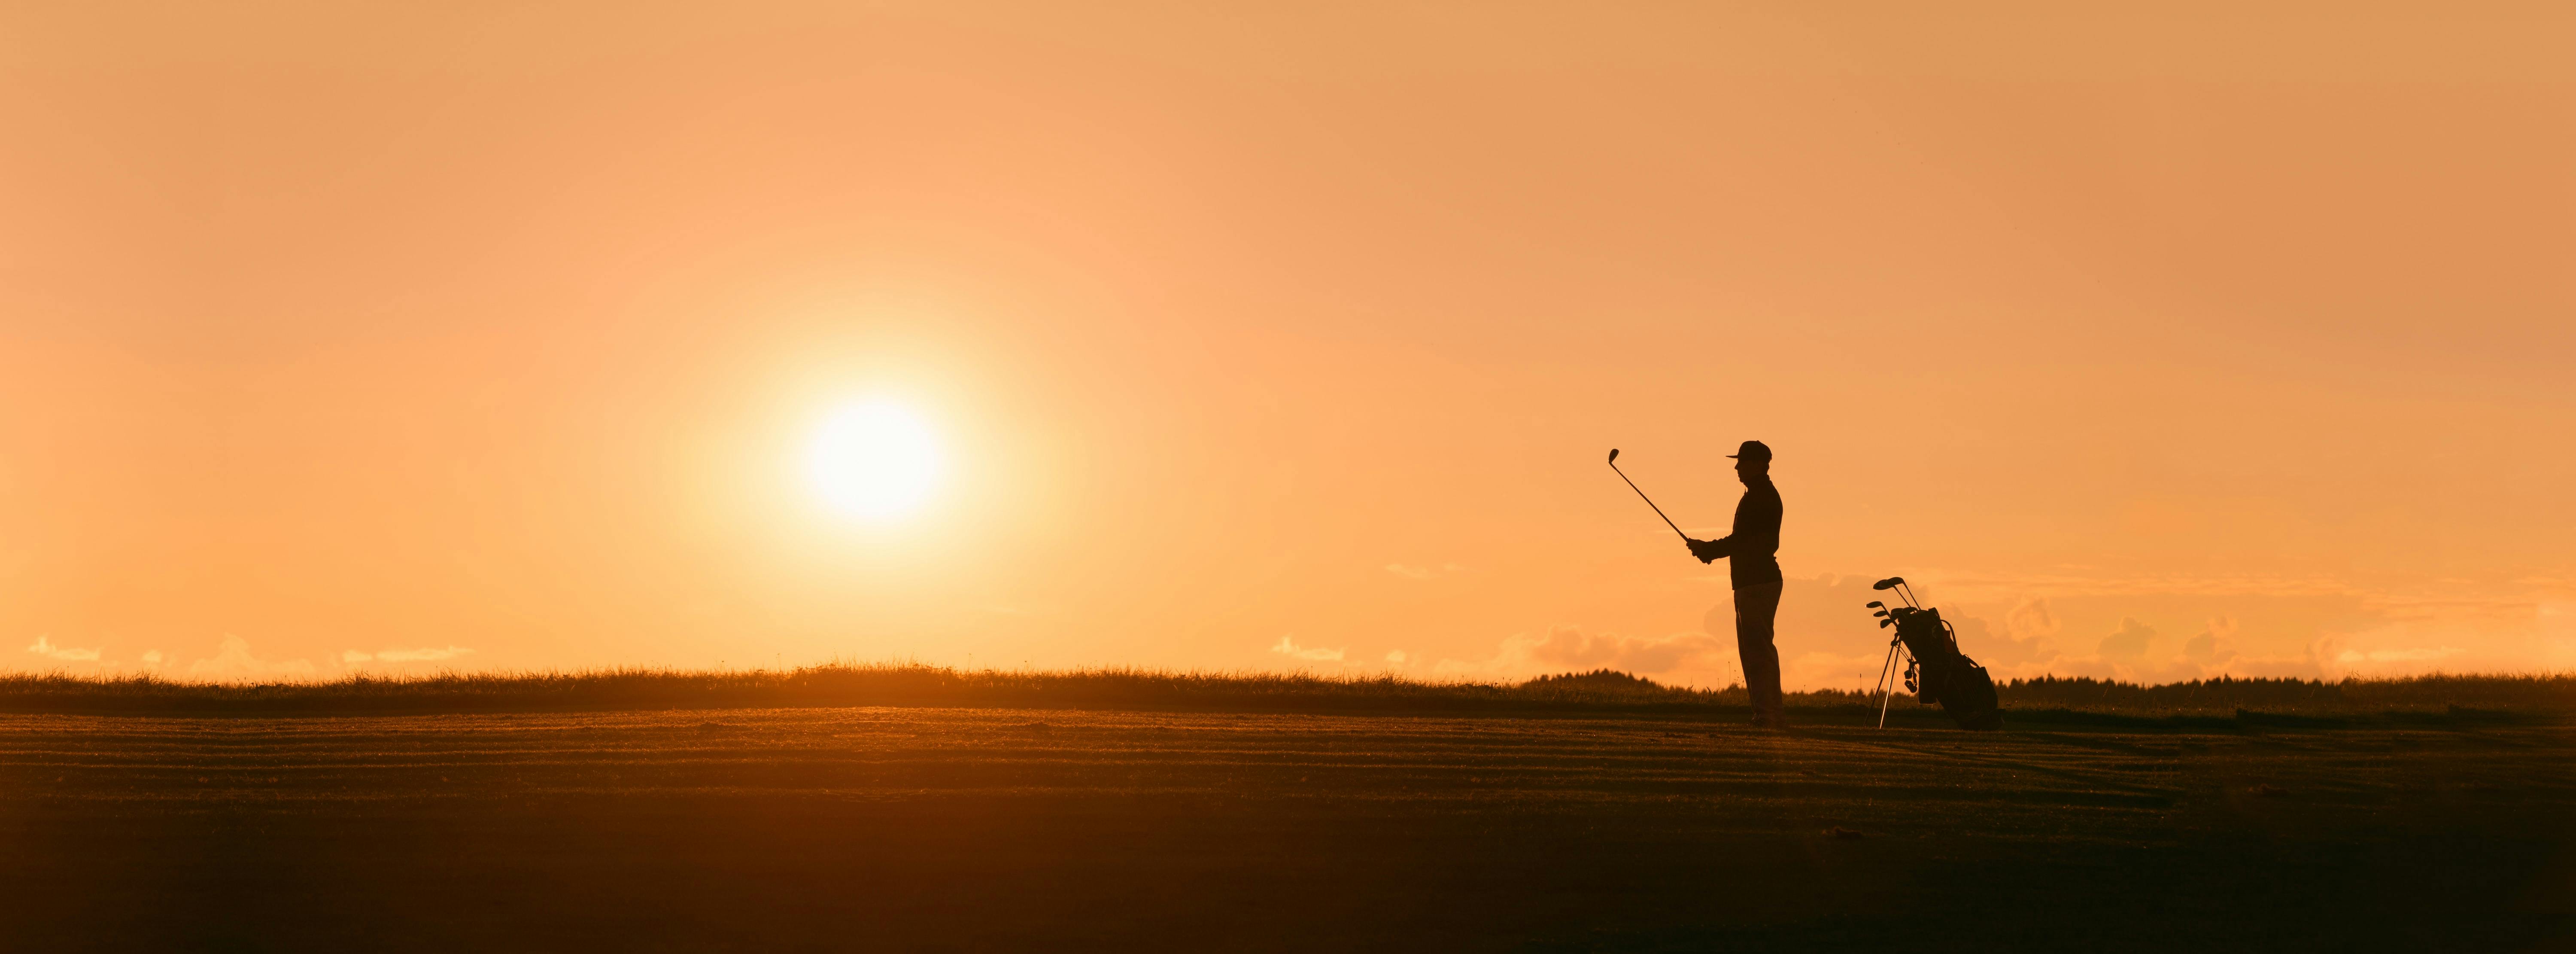 A golfer stands with his club as the sun is going down.